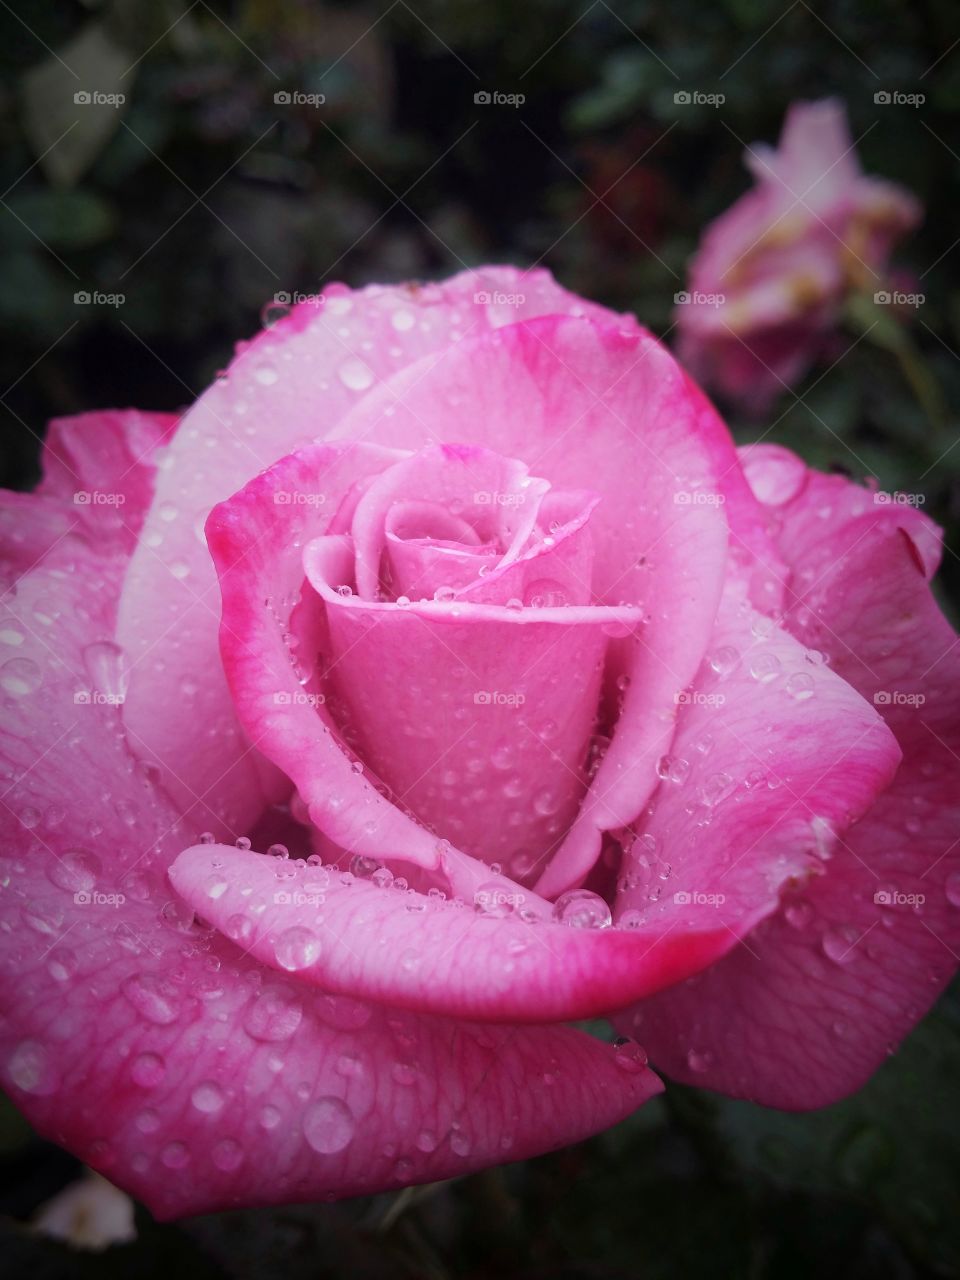 Color love a vibrant pink rose with dew drops on the petals with a dark green background